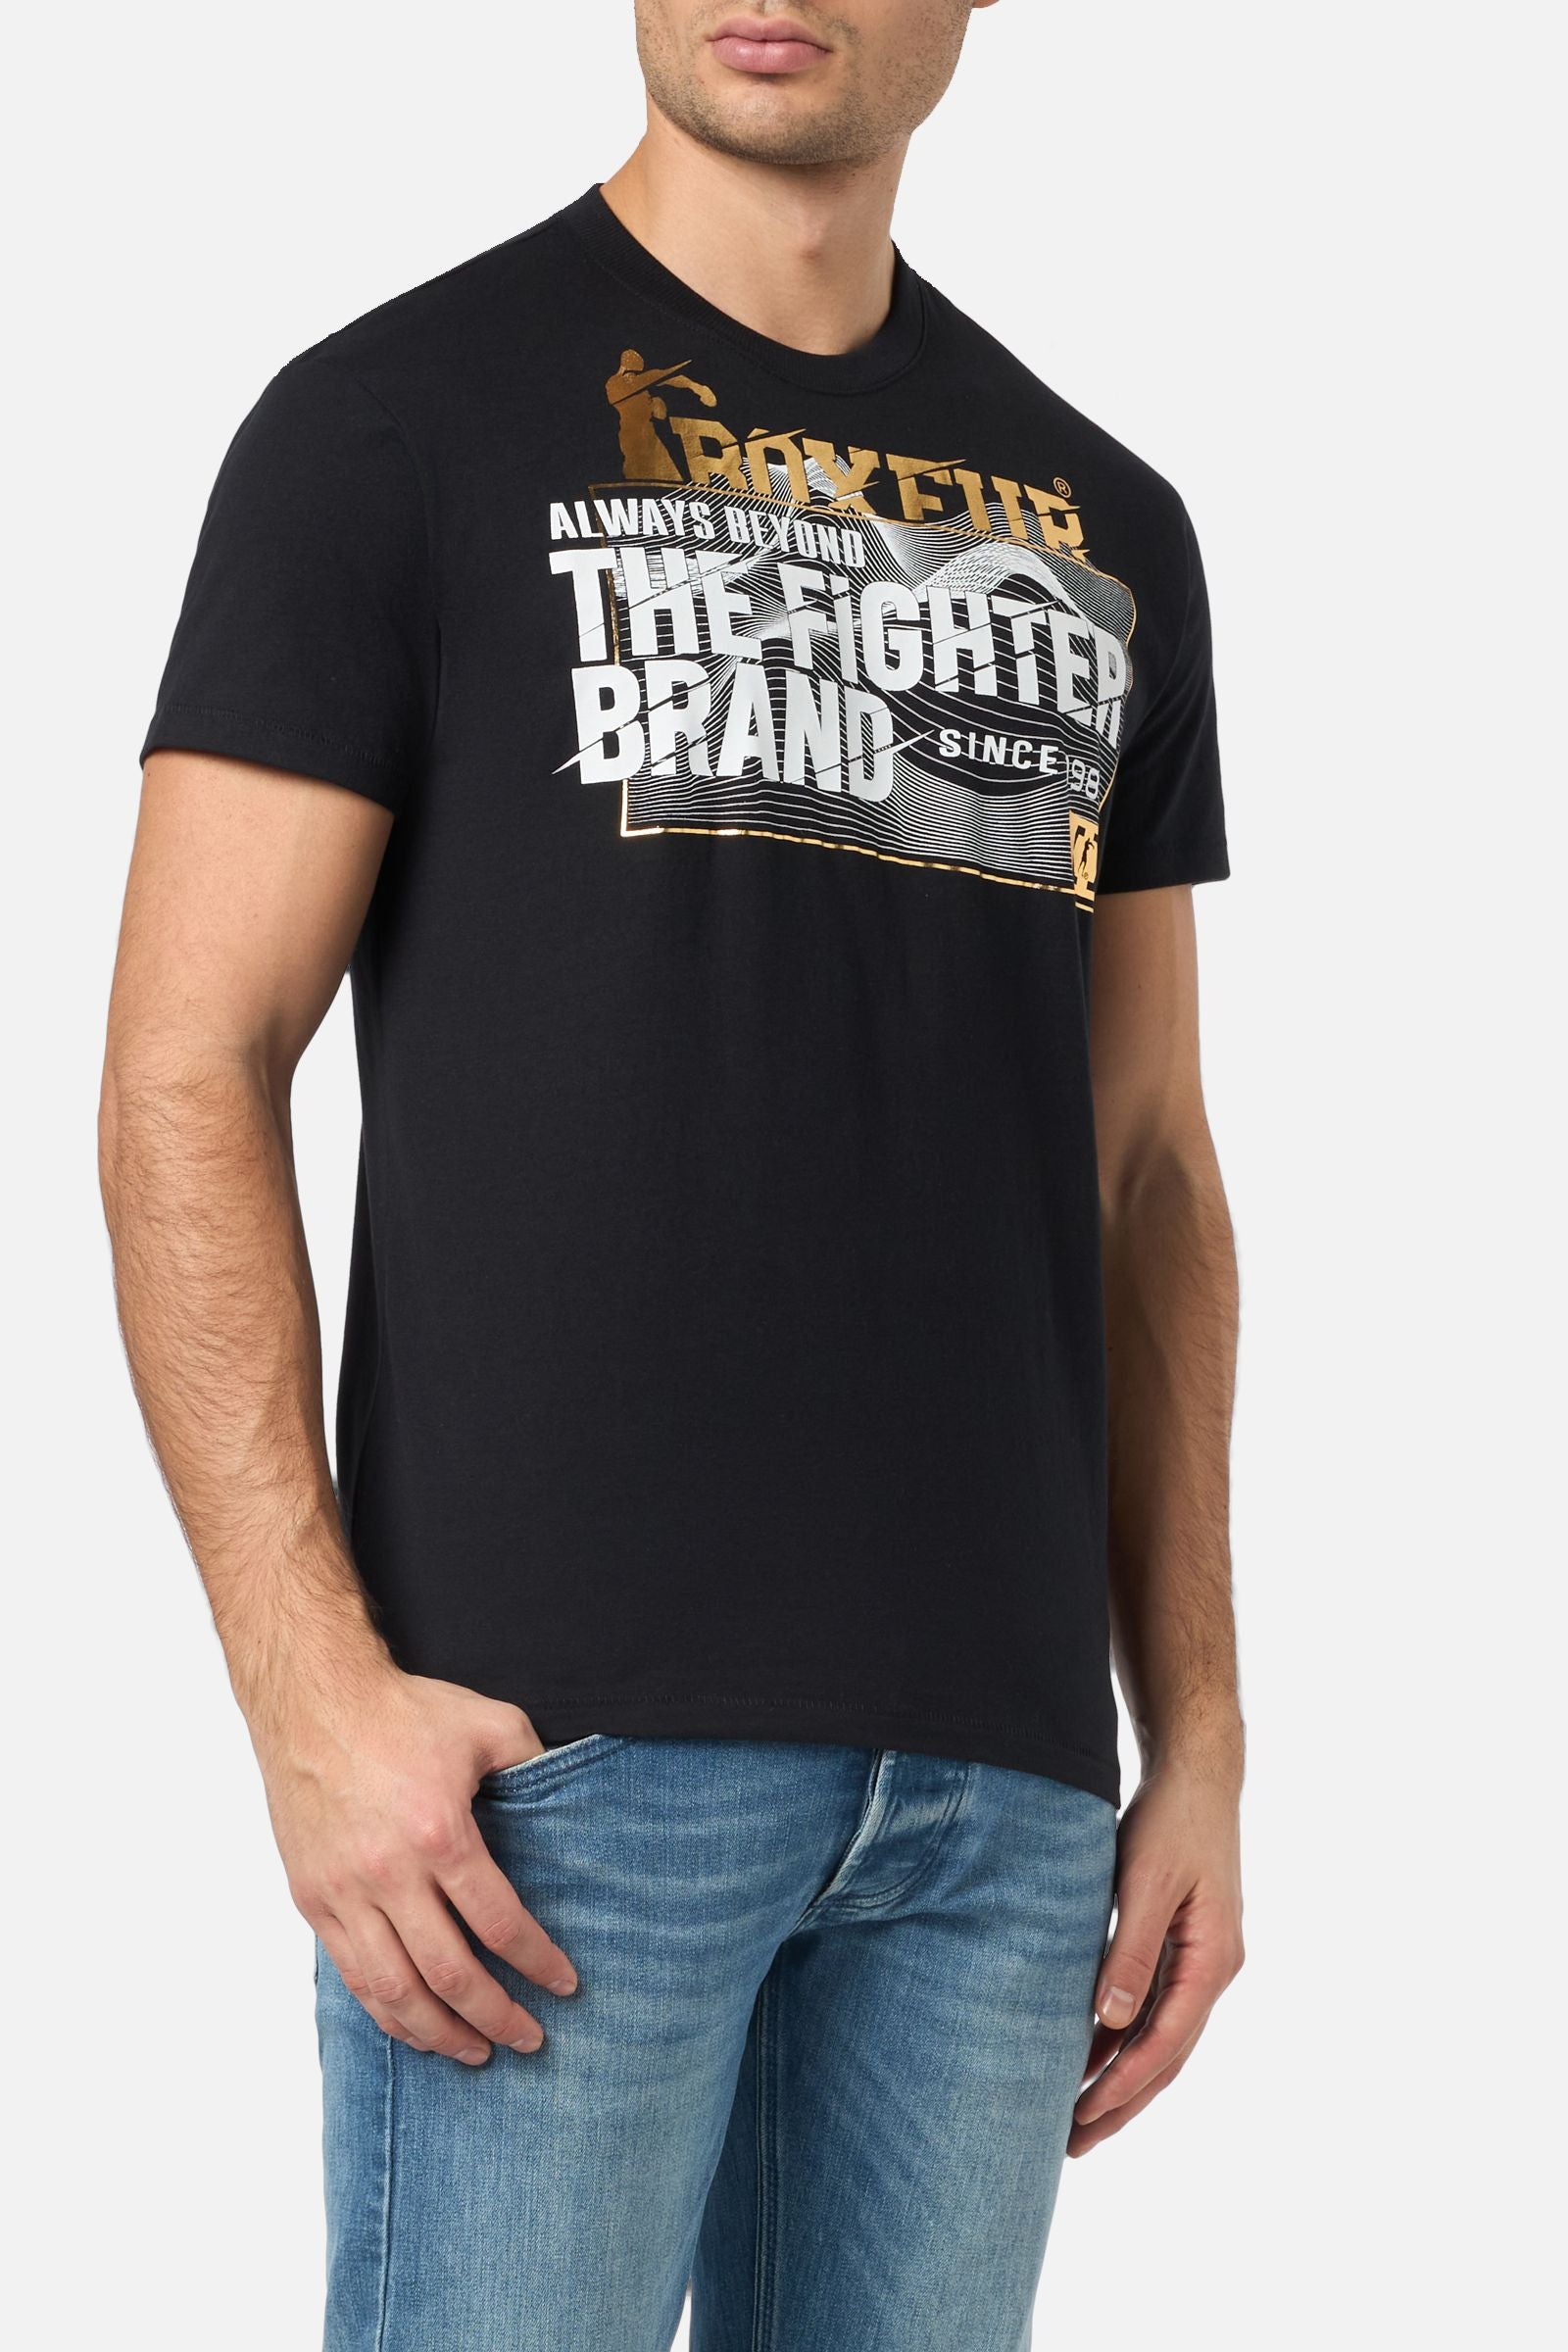 T-Shirt with Print in Black-Gold T-Shirts Boxeur des Rues   